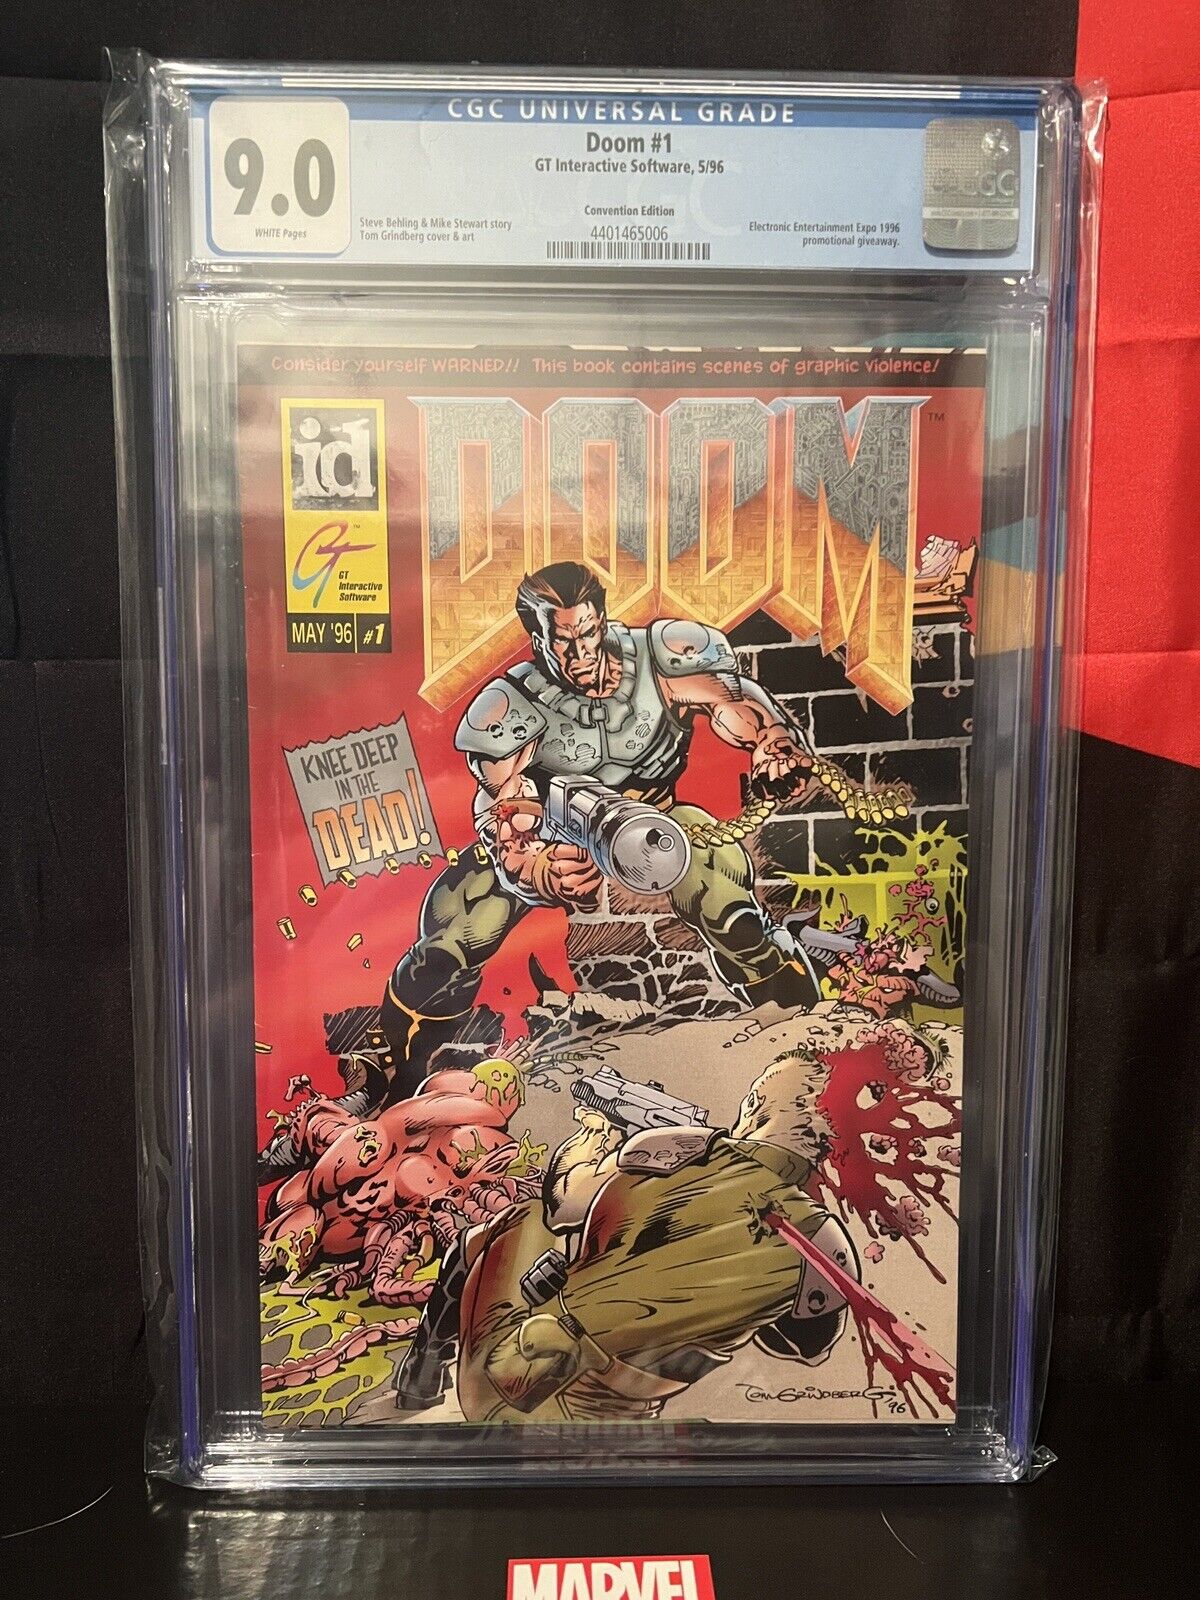 🔥DOOM #1 🔥NEW GAME ANNOUNCED CGC 9.0 GT 5/96 Convention Edition Video Game